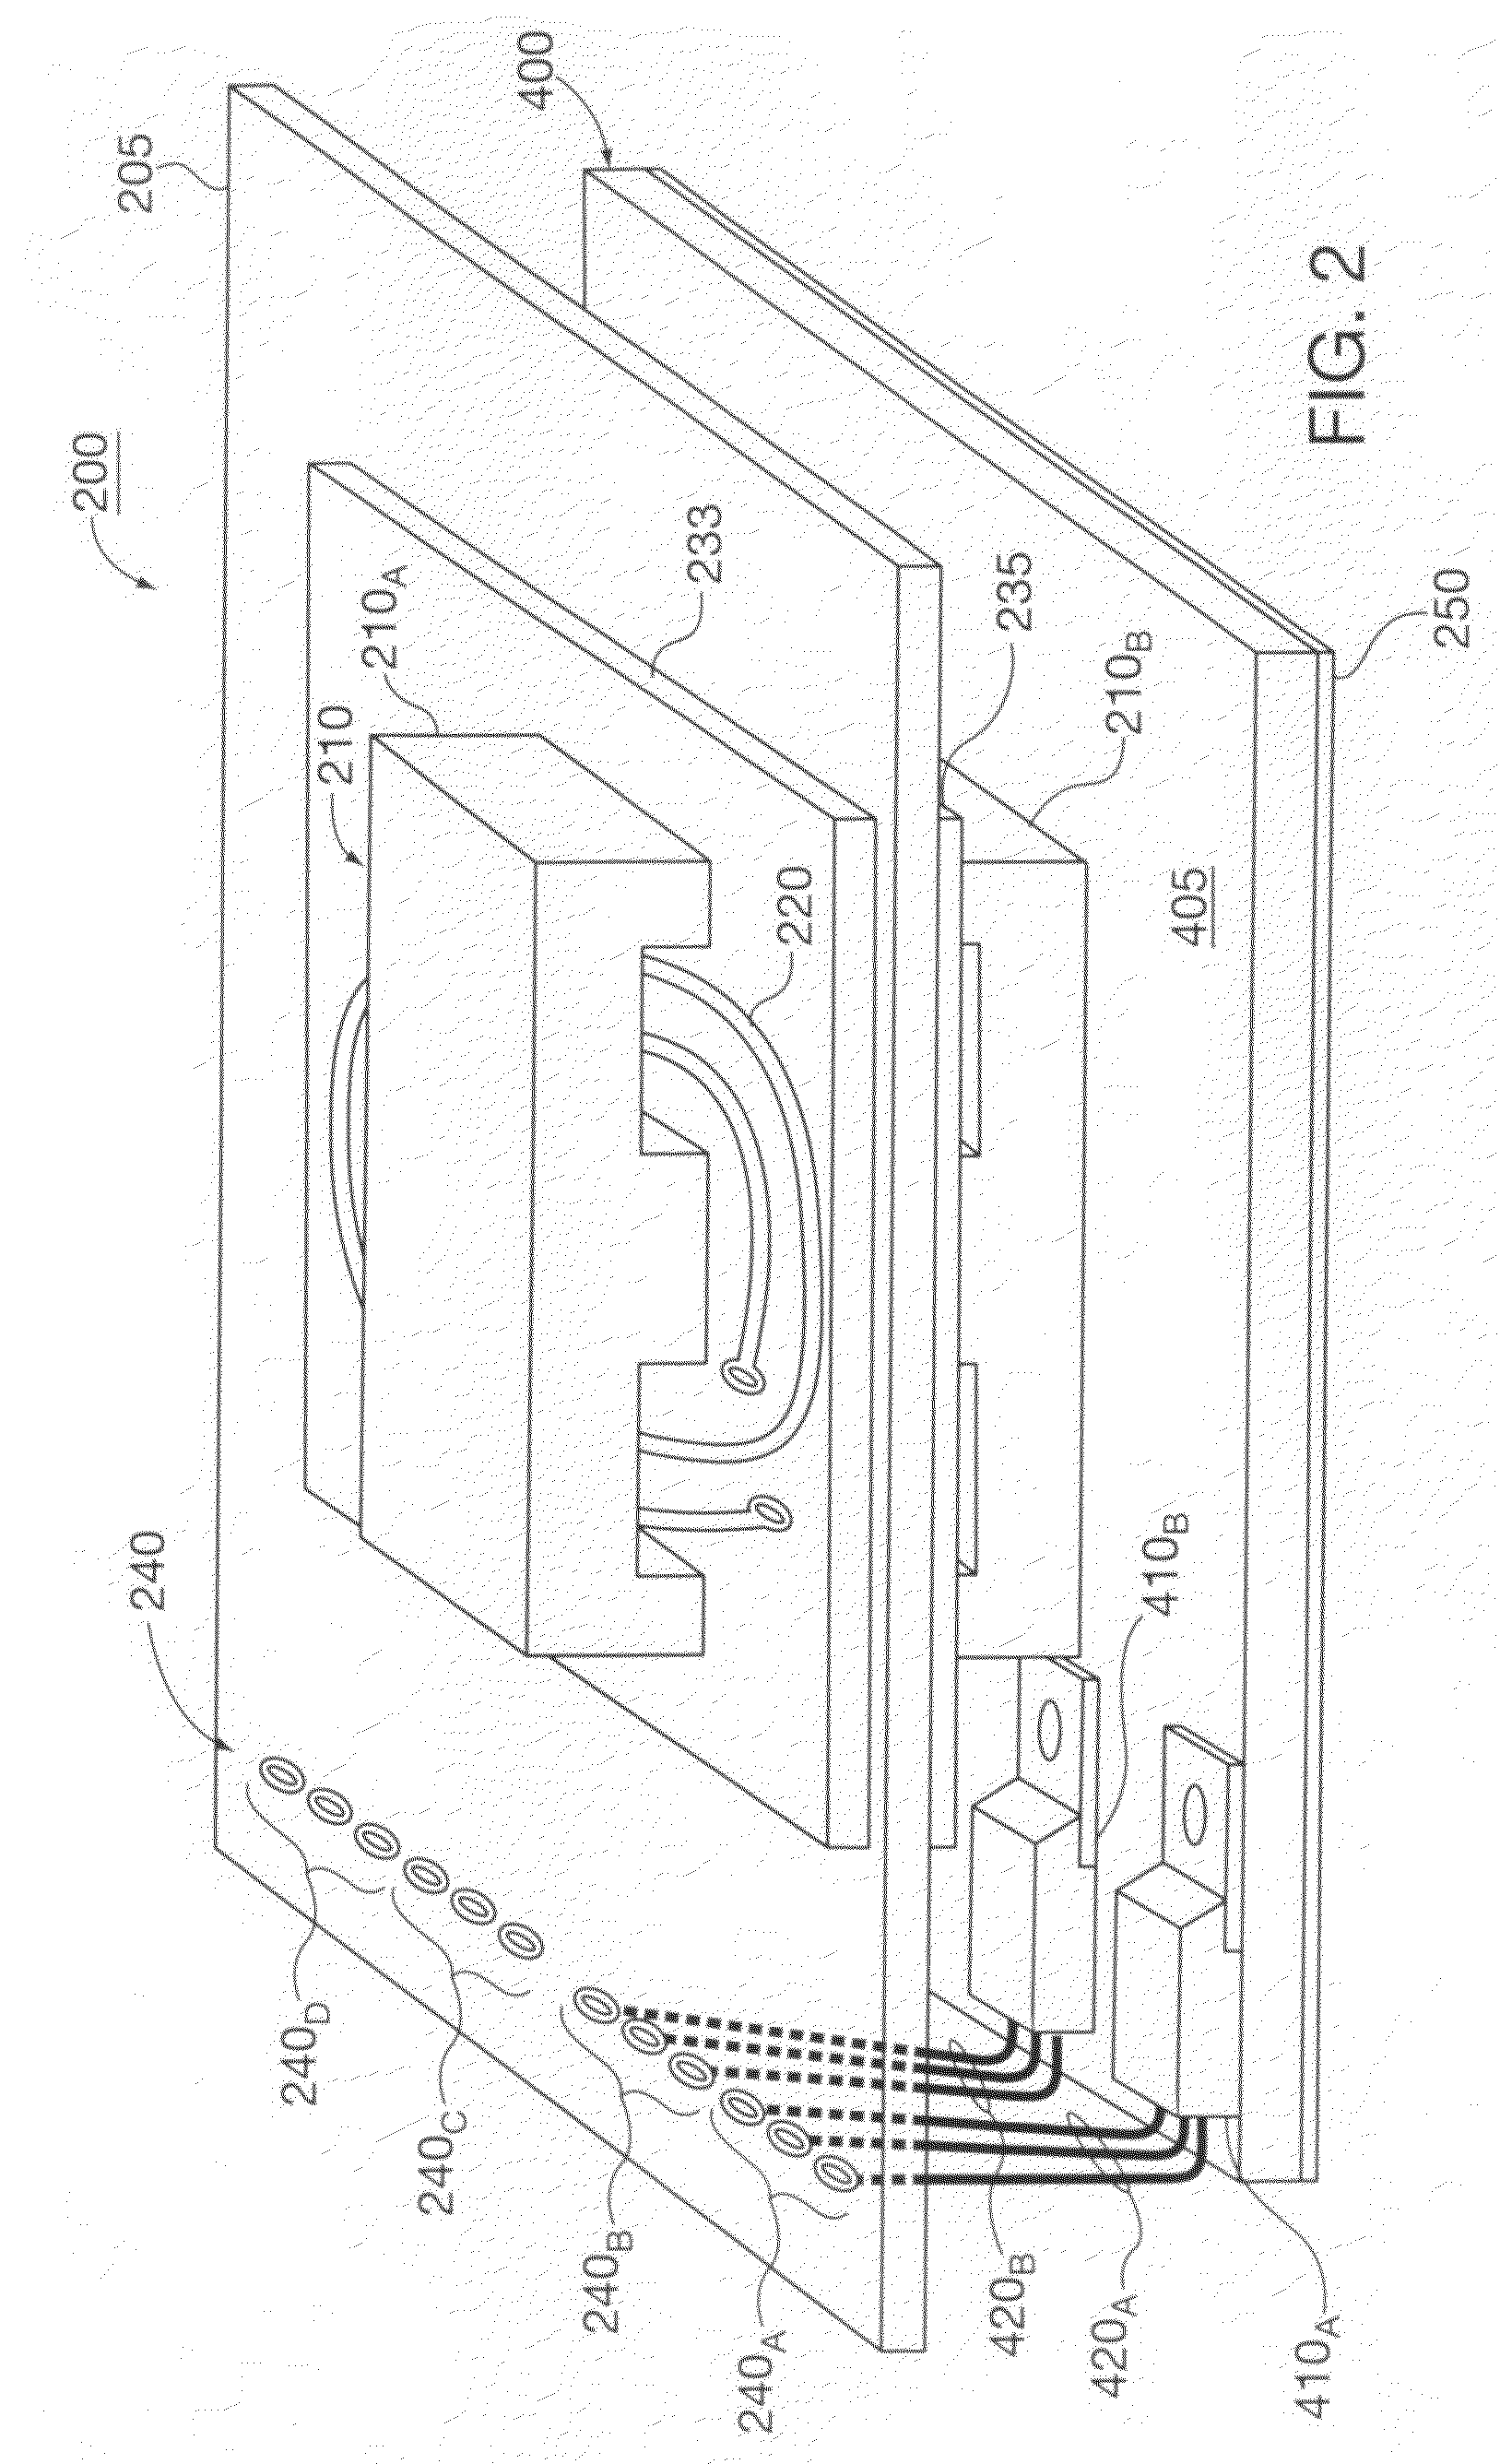 Mechanical arrangement for use within galvanically-isolated, low-profile micro-inverters for solar power installations